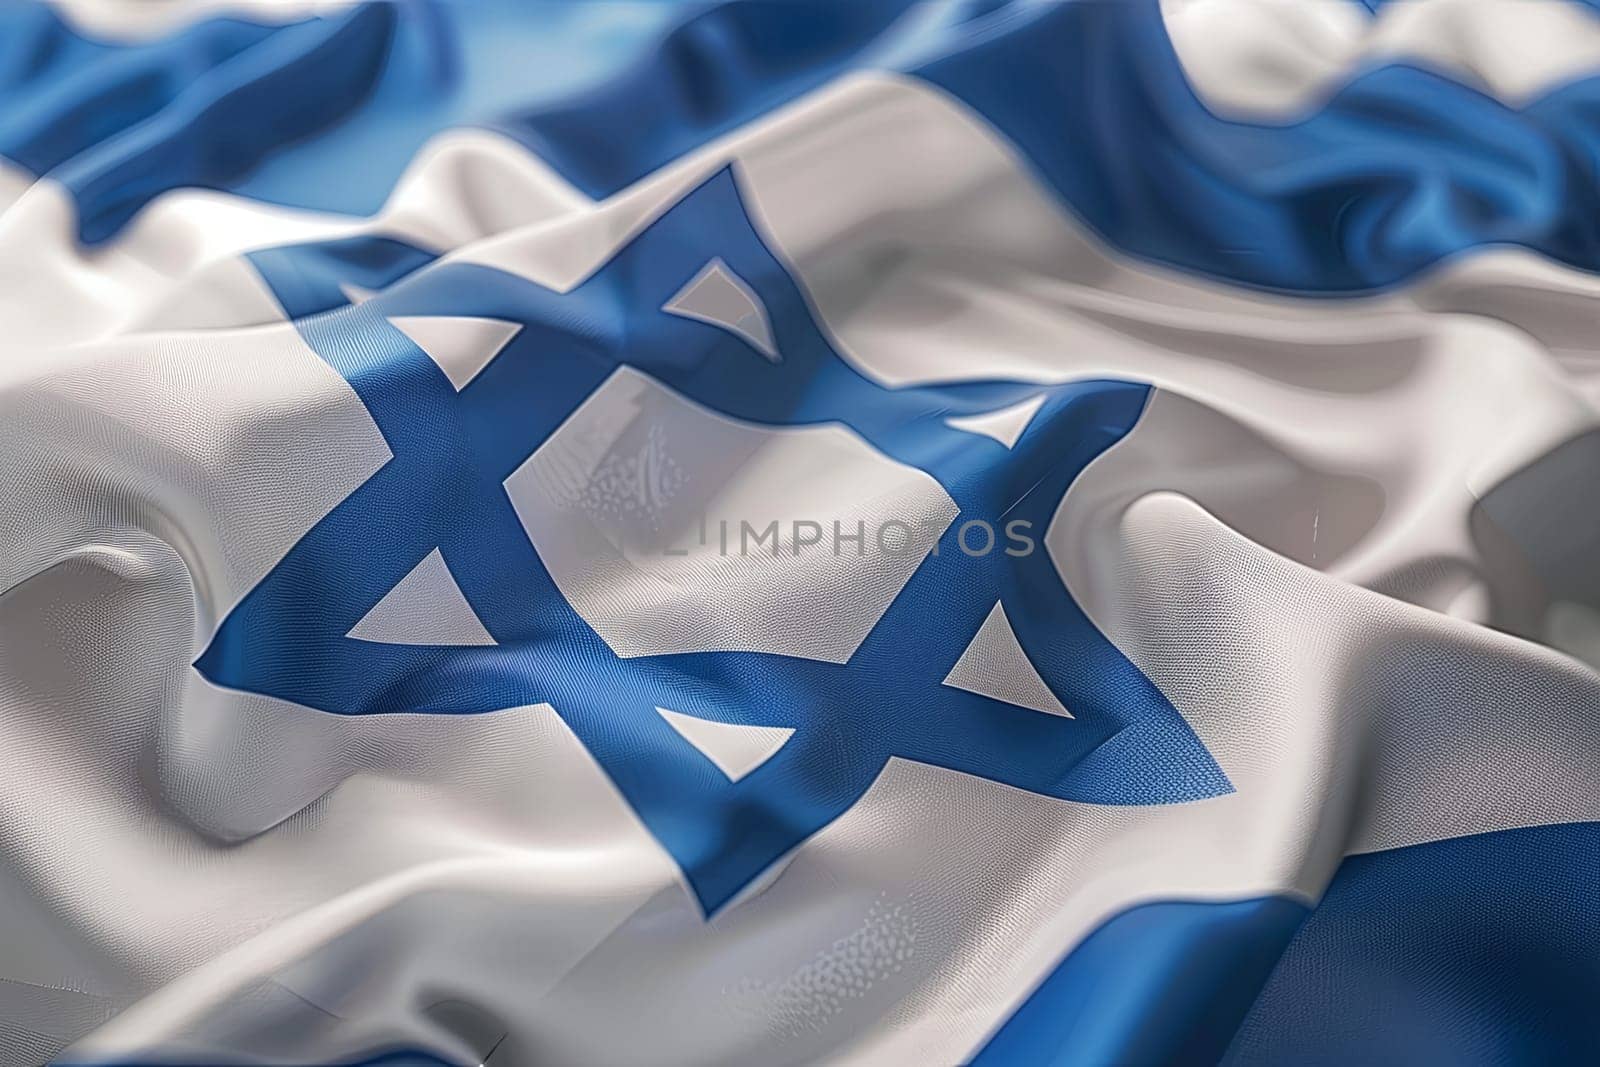 National flag of Israel fluttering in the wind. Close-up view of a blue and white flag with the Star of David symbol.